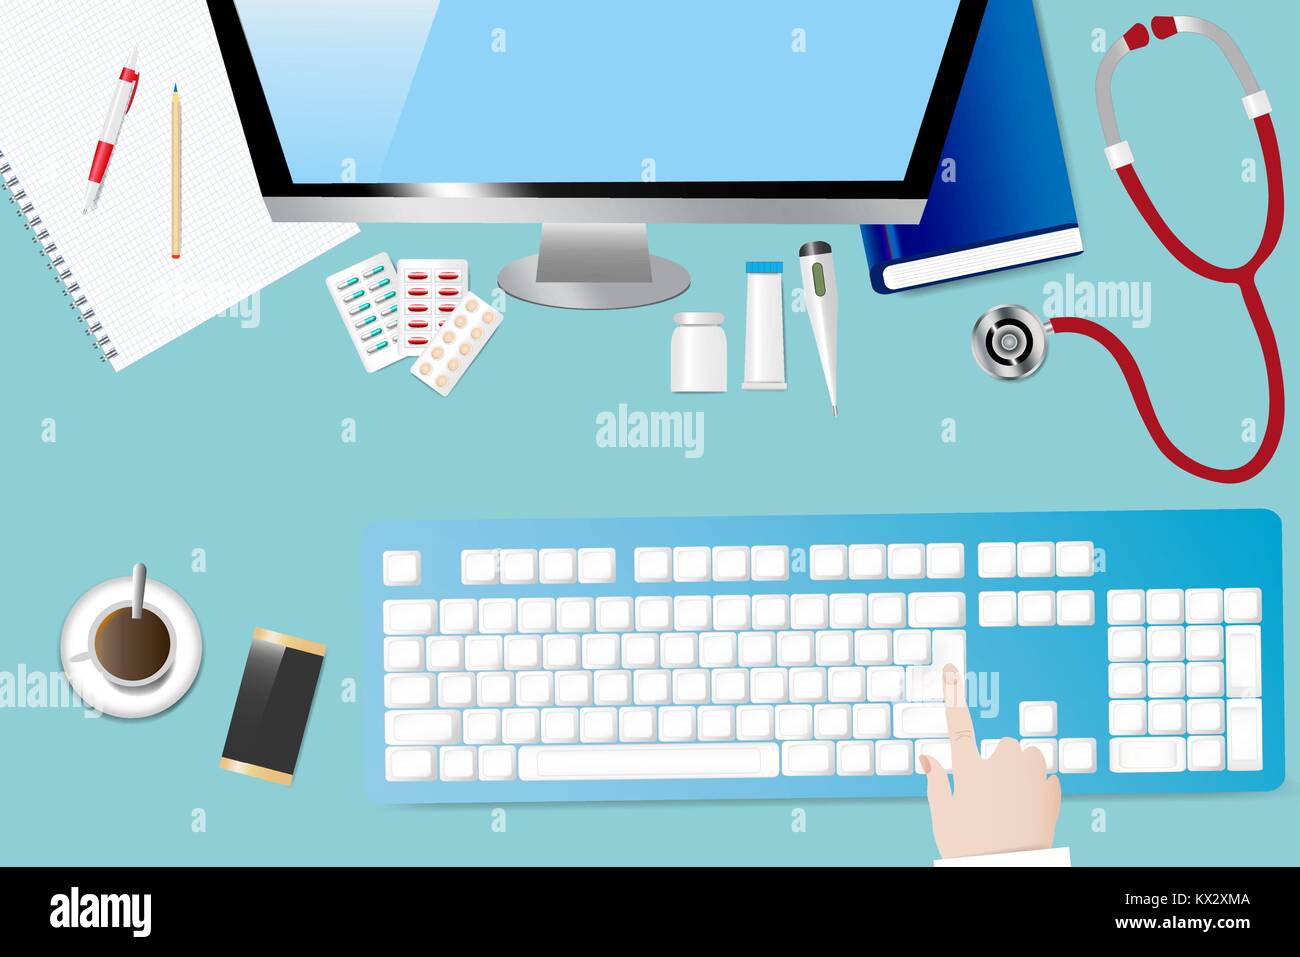 Top view of a medical table with doctor accessories. Finger is touching computer keyboard. All potential trademarks are removed. Stock Vector